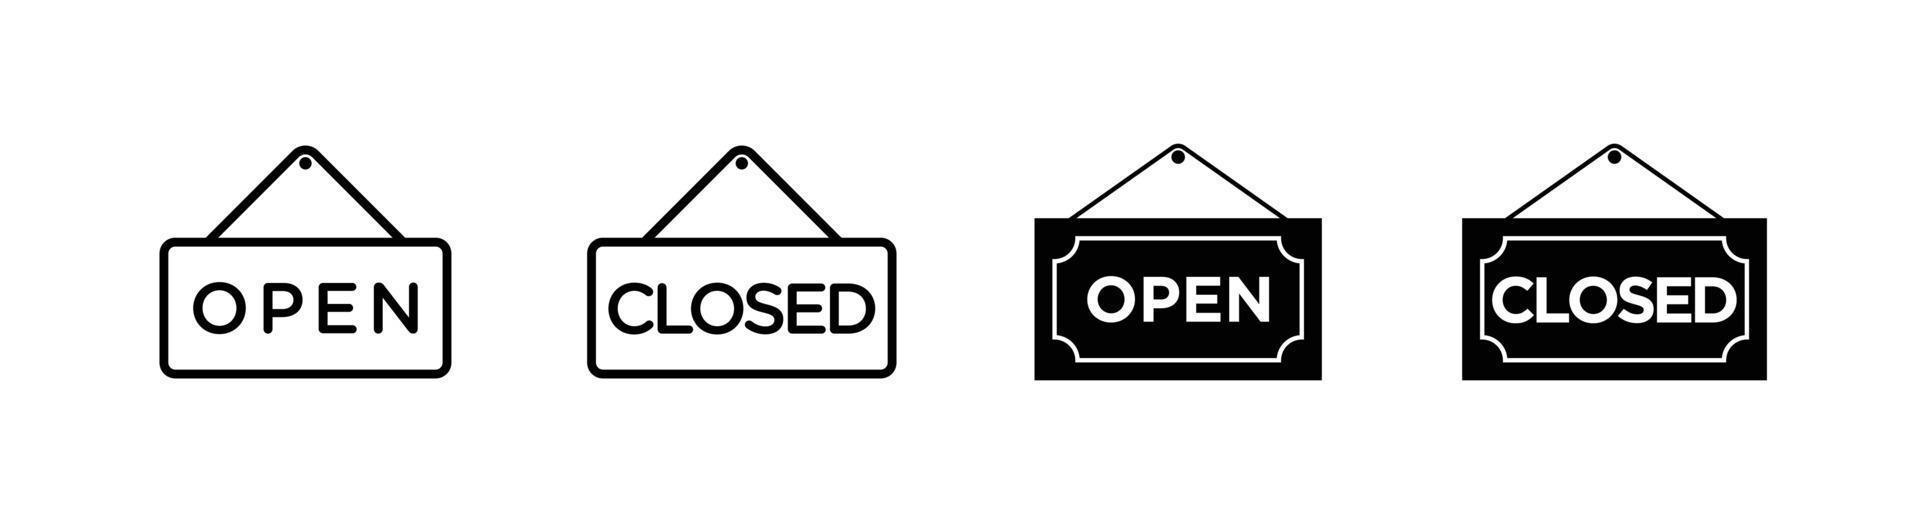 Open and Closed sign, store notice icon design element vector